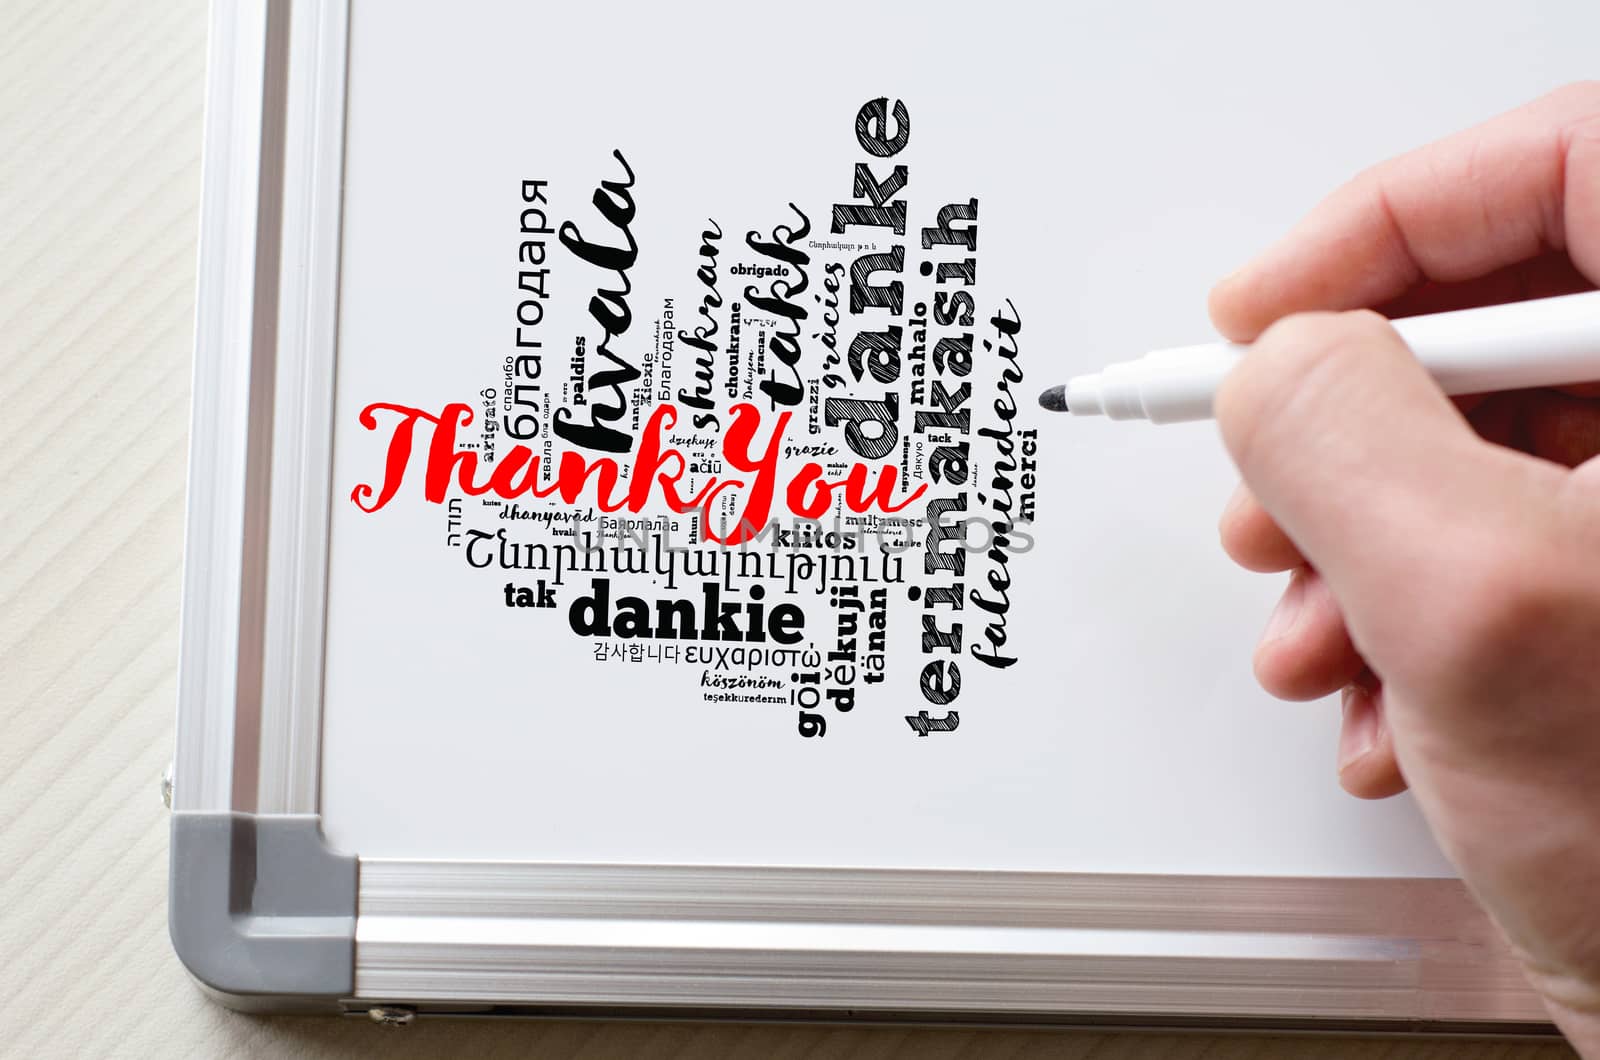 Thank You word cloud in different languages with marker and whiteboard